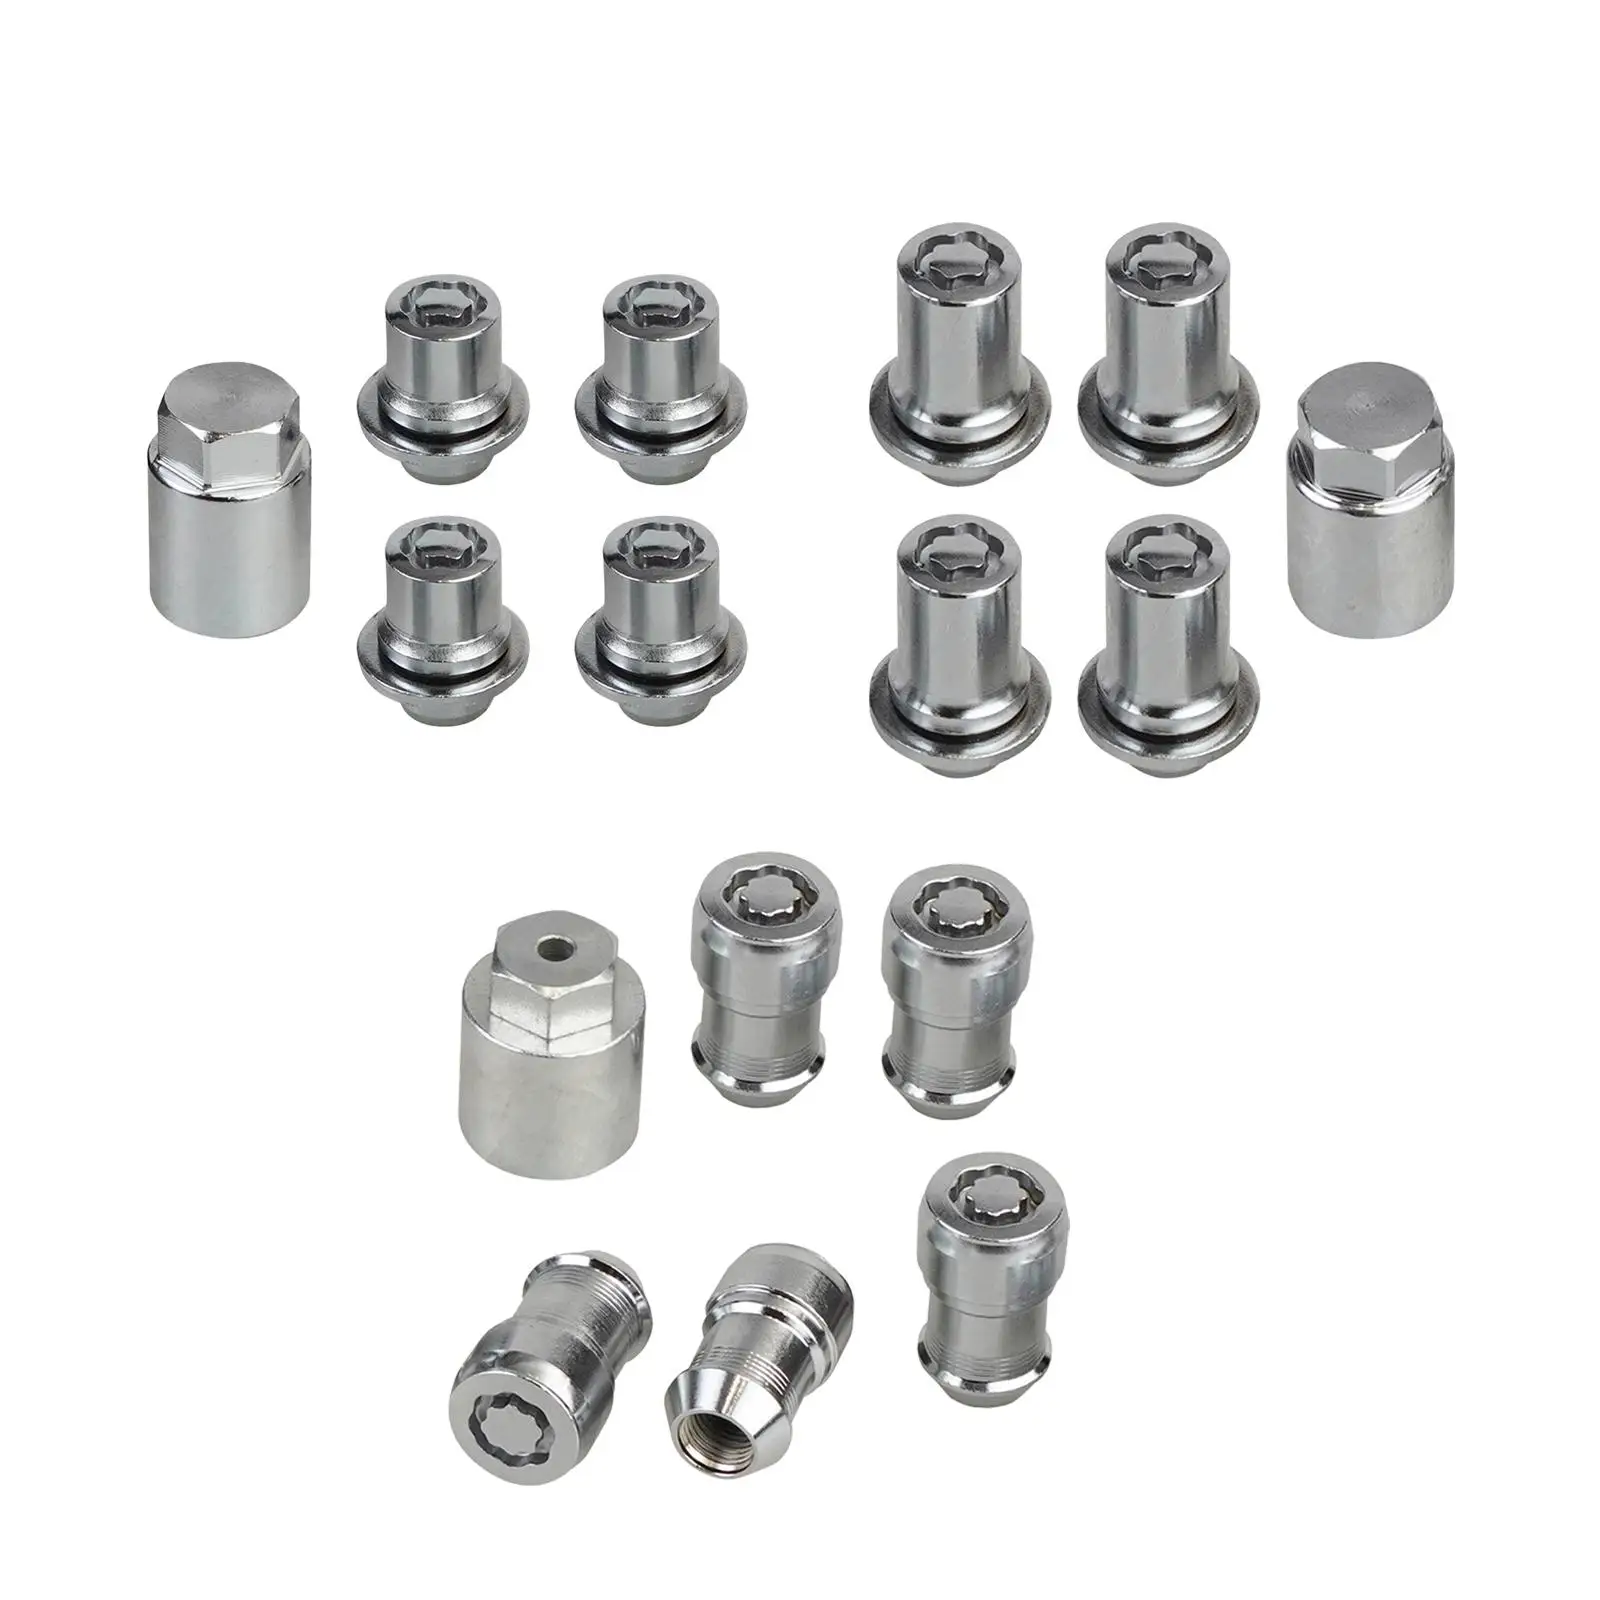 Wheel Lock Lug Nuts Set Security Locking Fittings Replaces Car Accessories